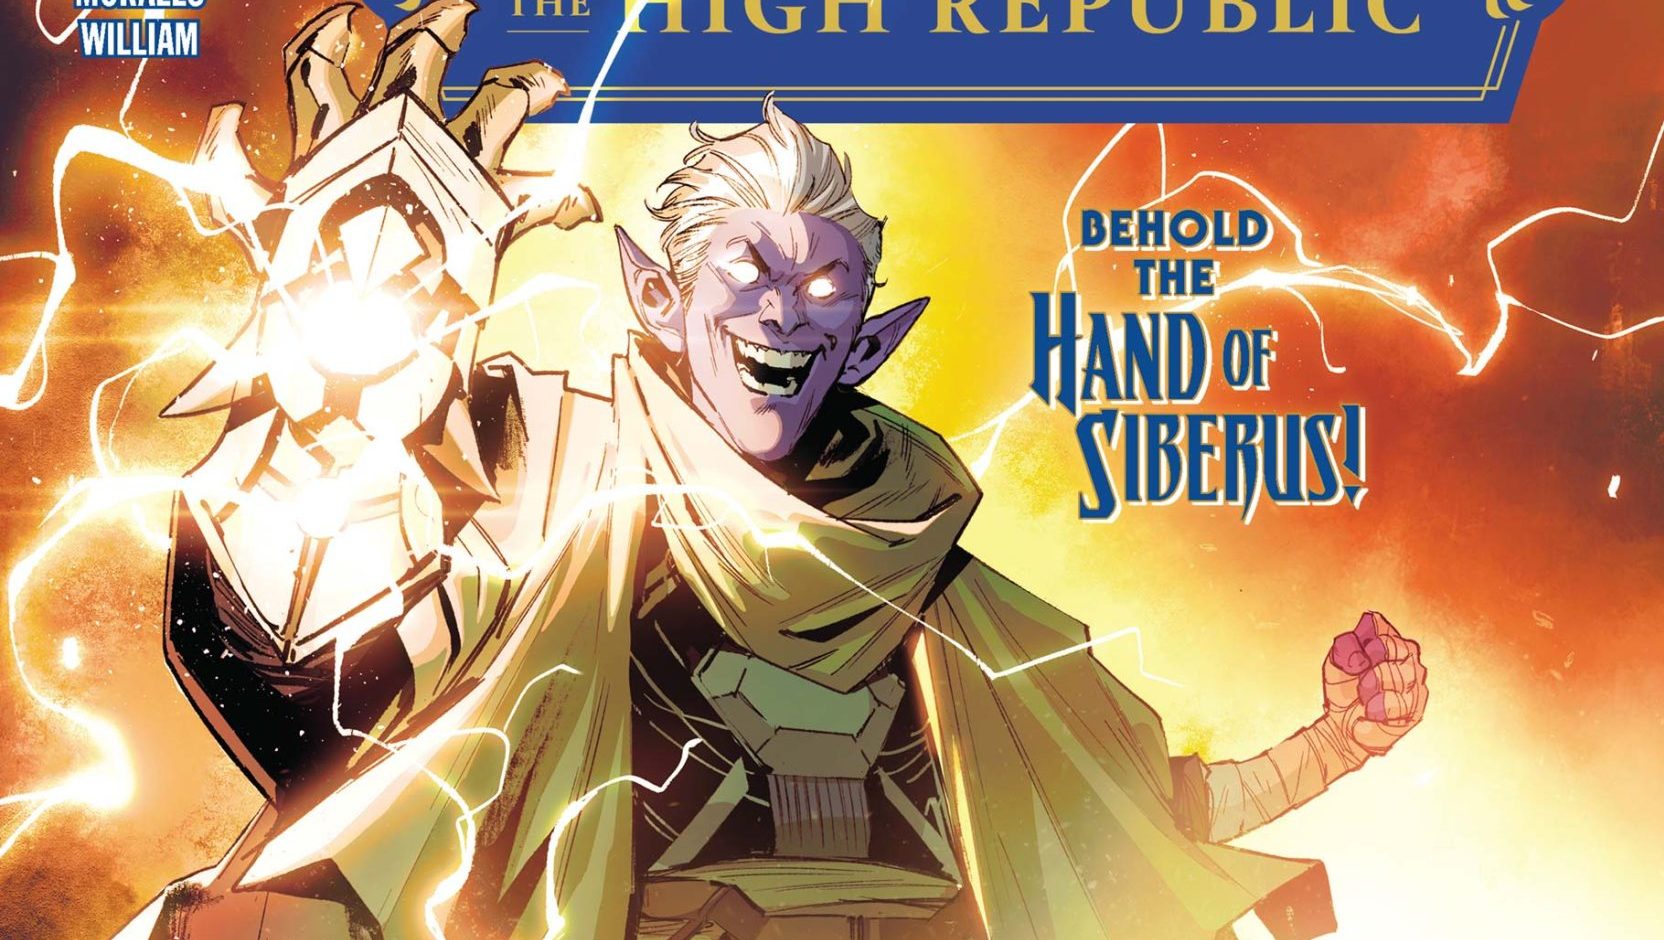 The High Republic #9 cover cropped